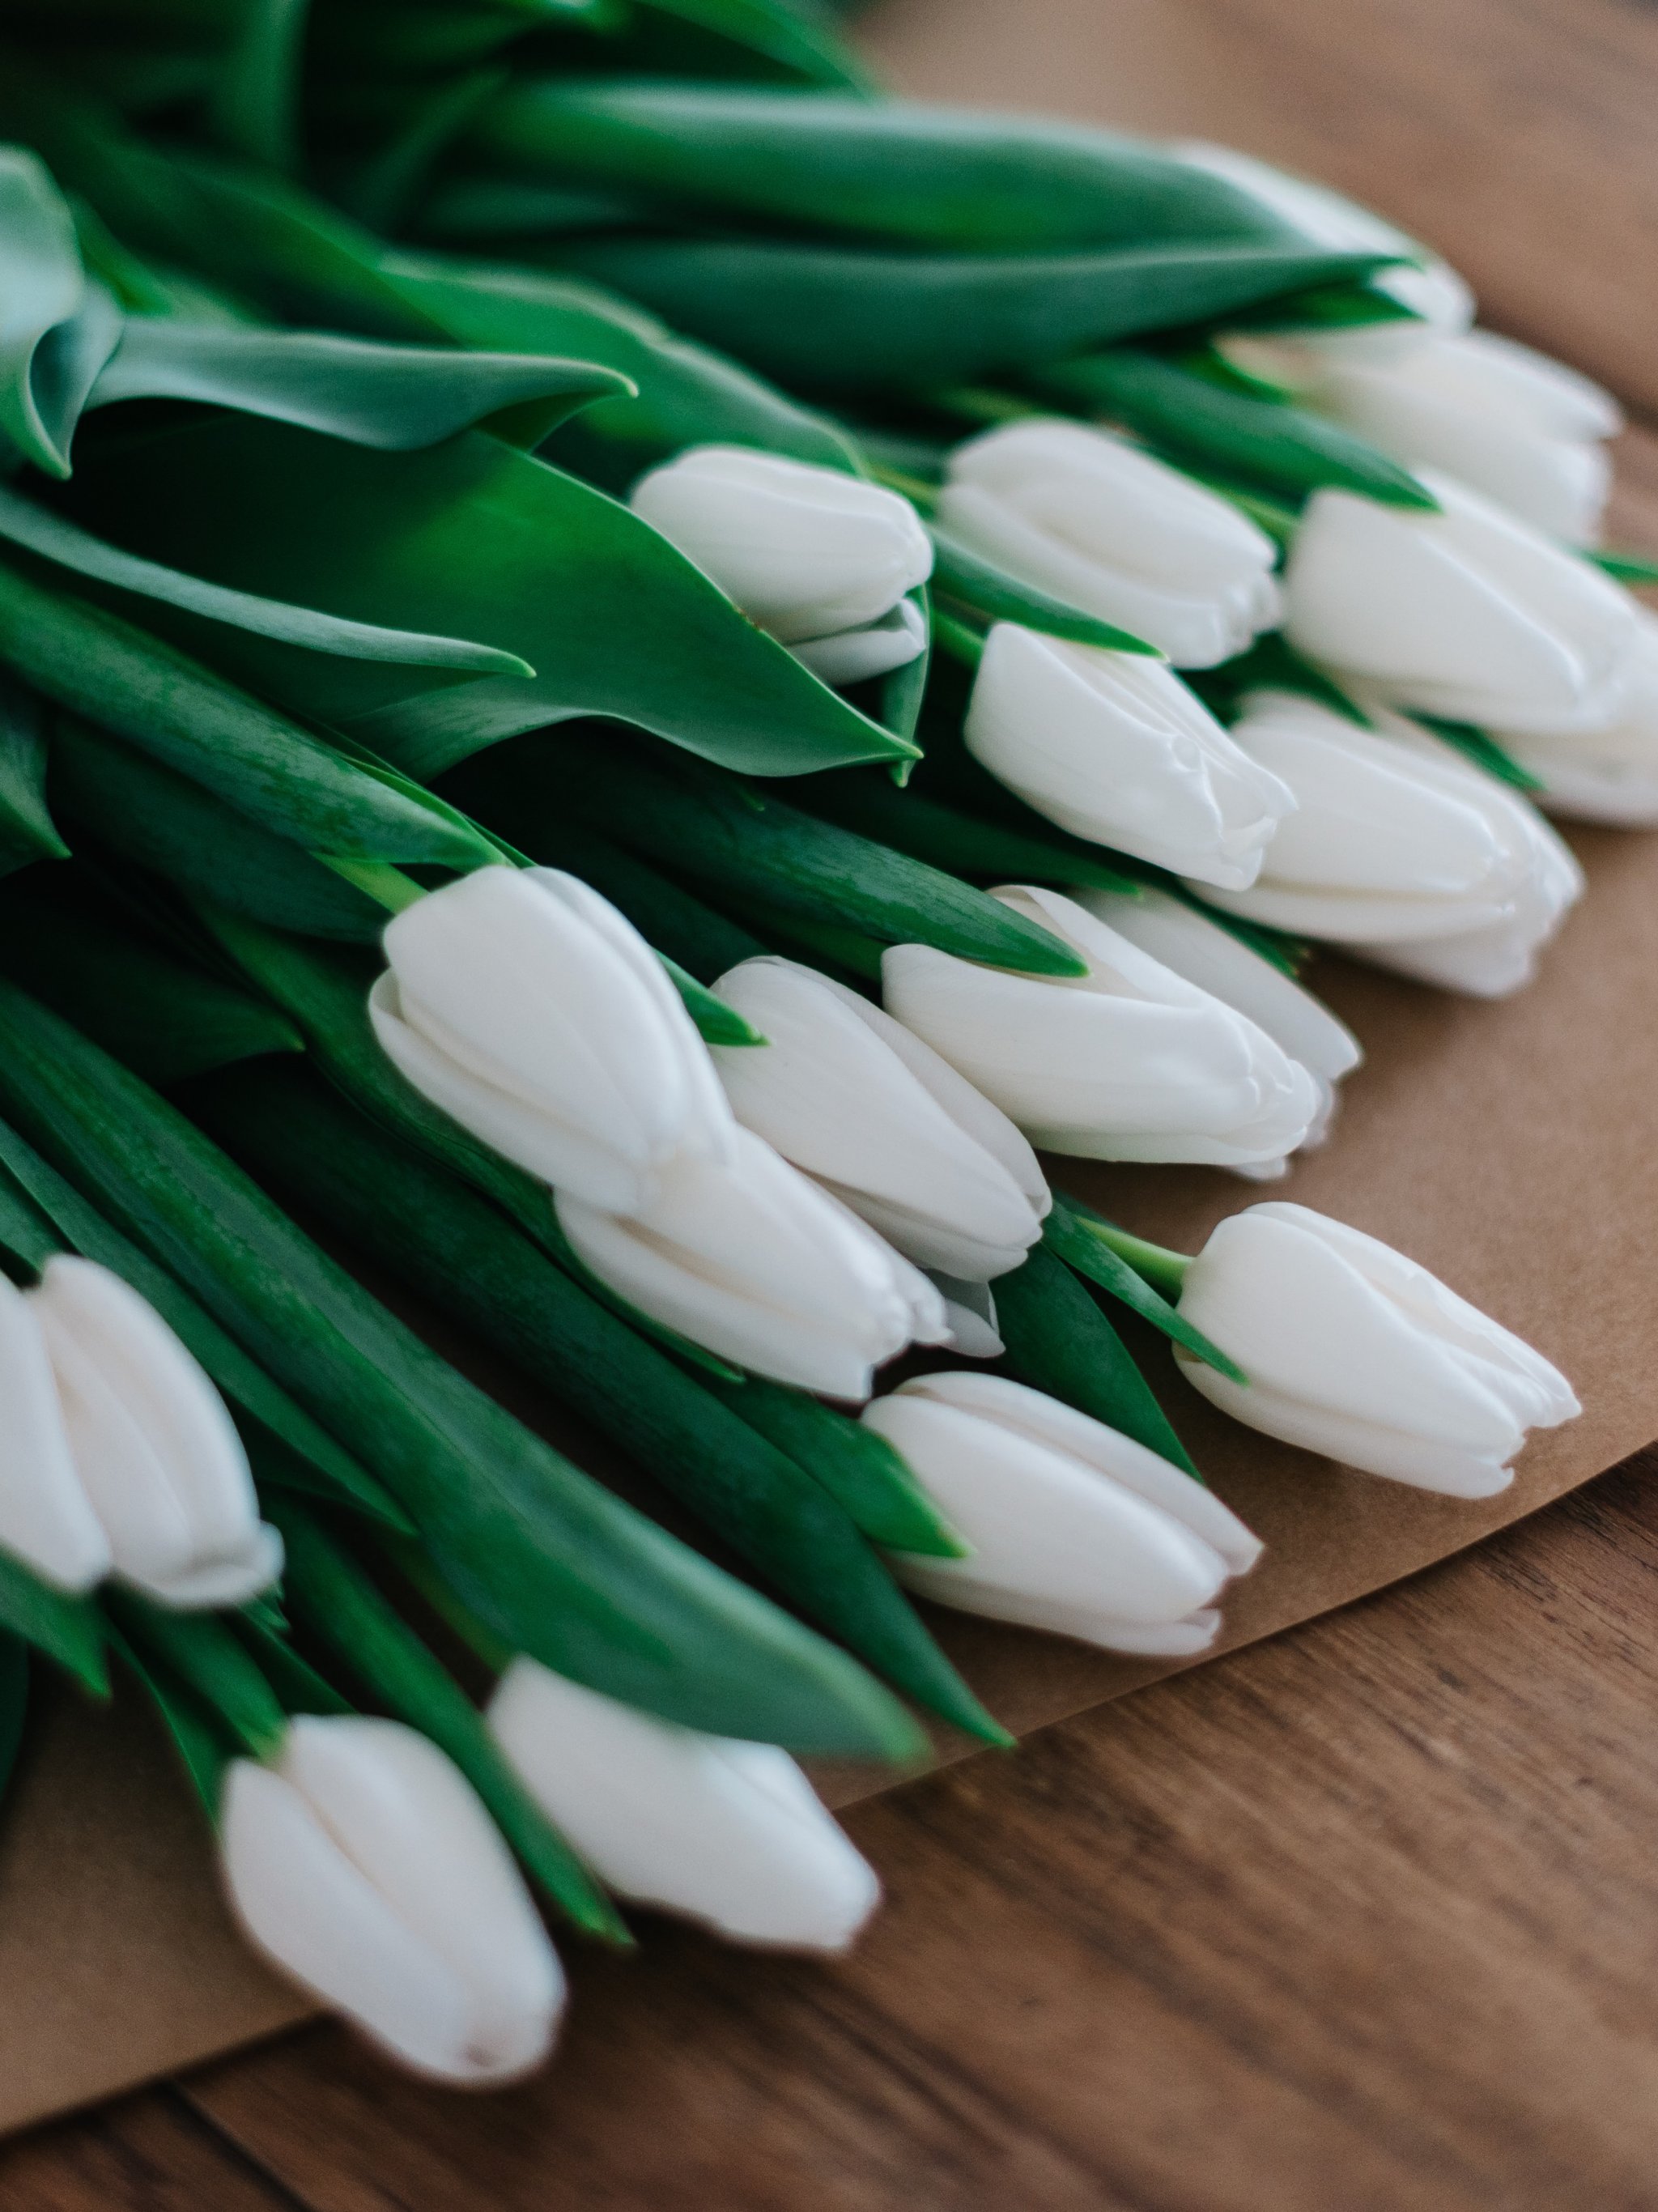 White Tulips Wallpapers